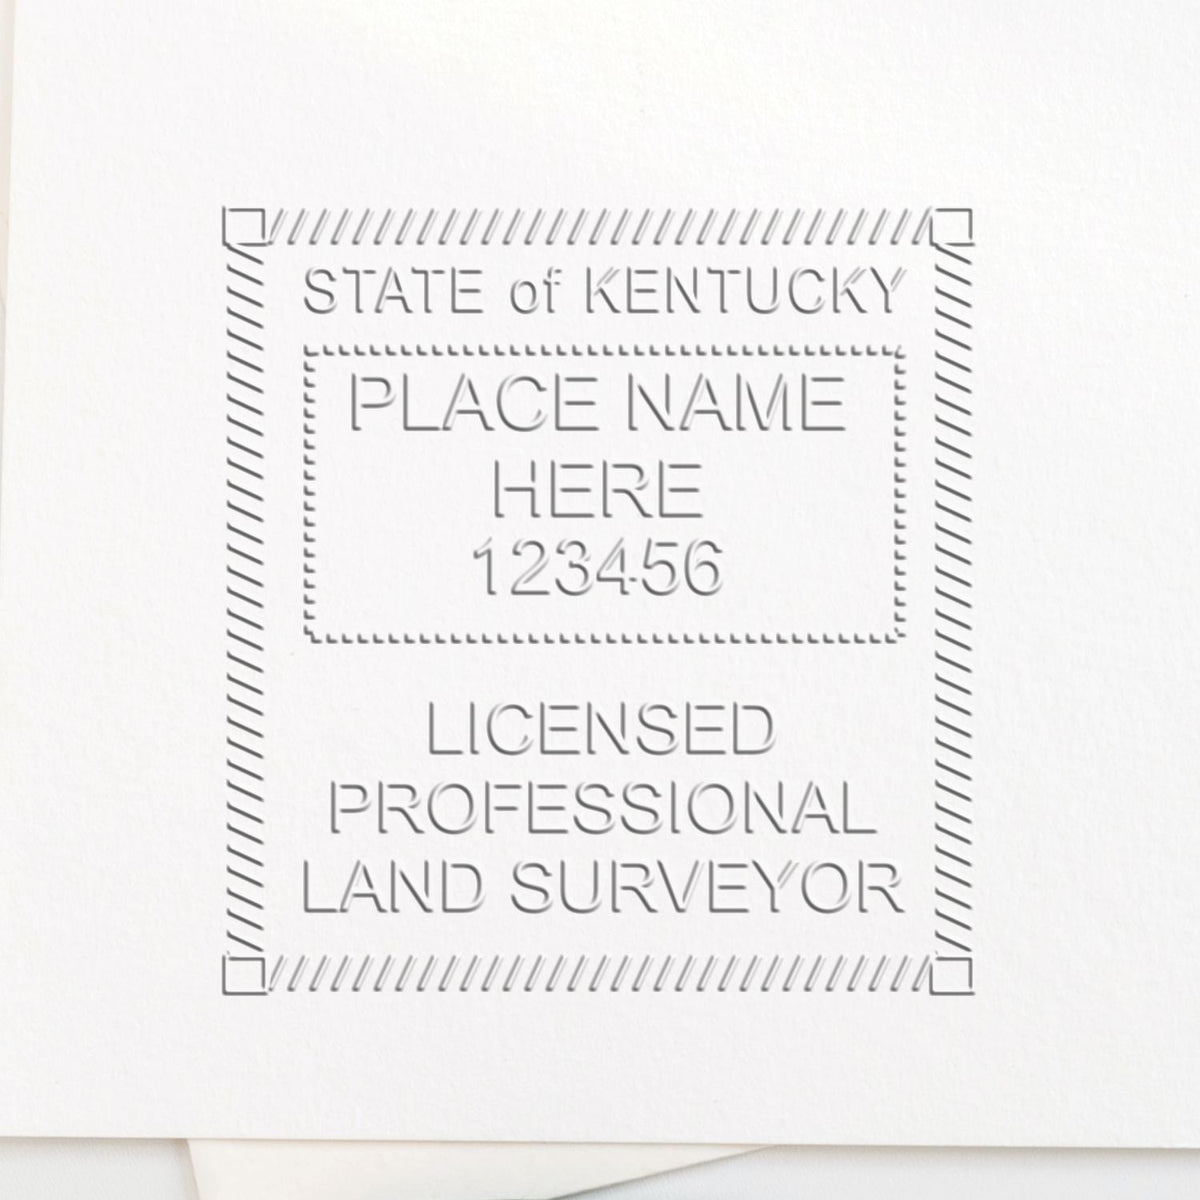 The Gift Kentucky Land Surveyor Seal stamp impression comes to life with a crisp, detailed image stamped on paper - showcasing true professional quality.